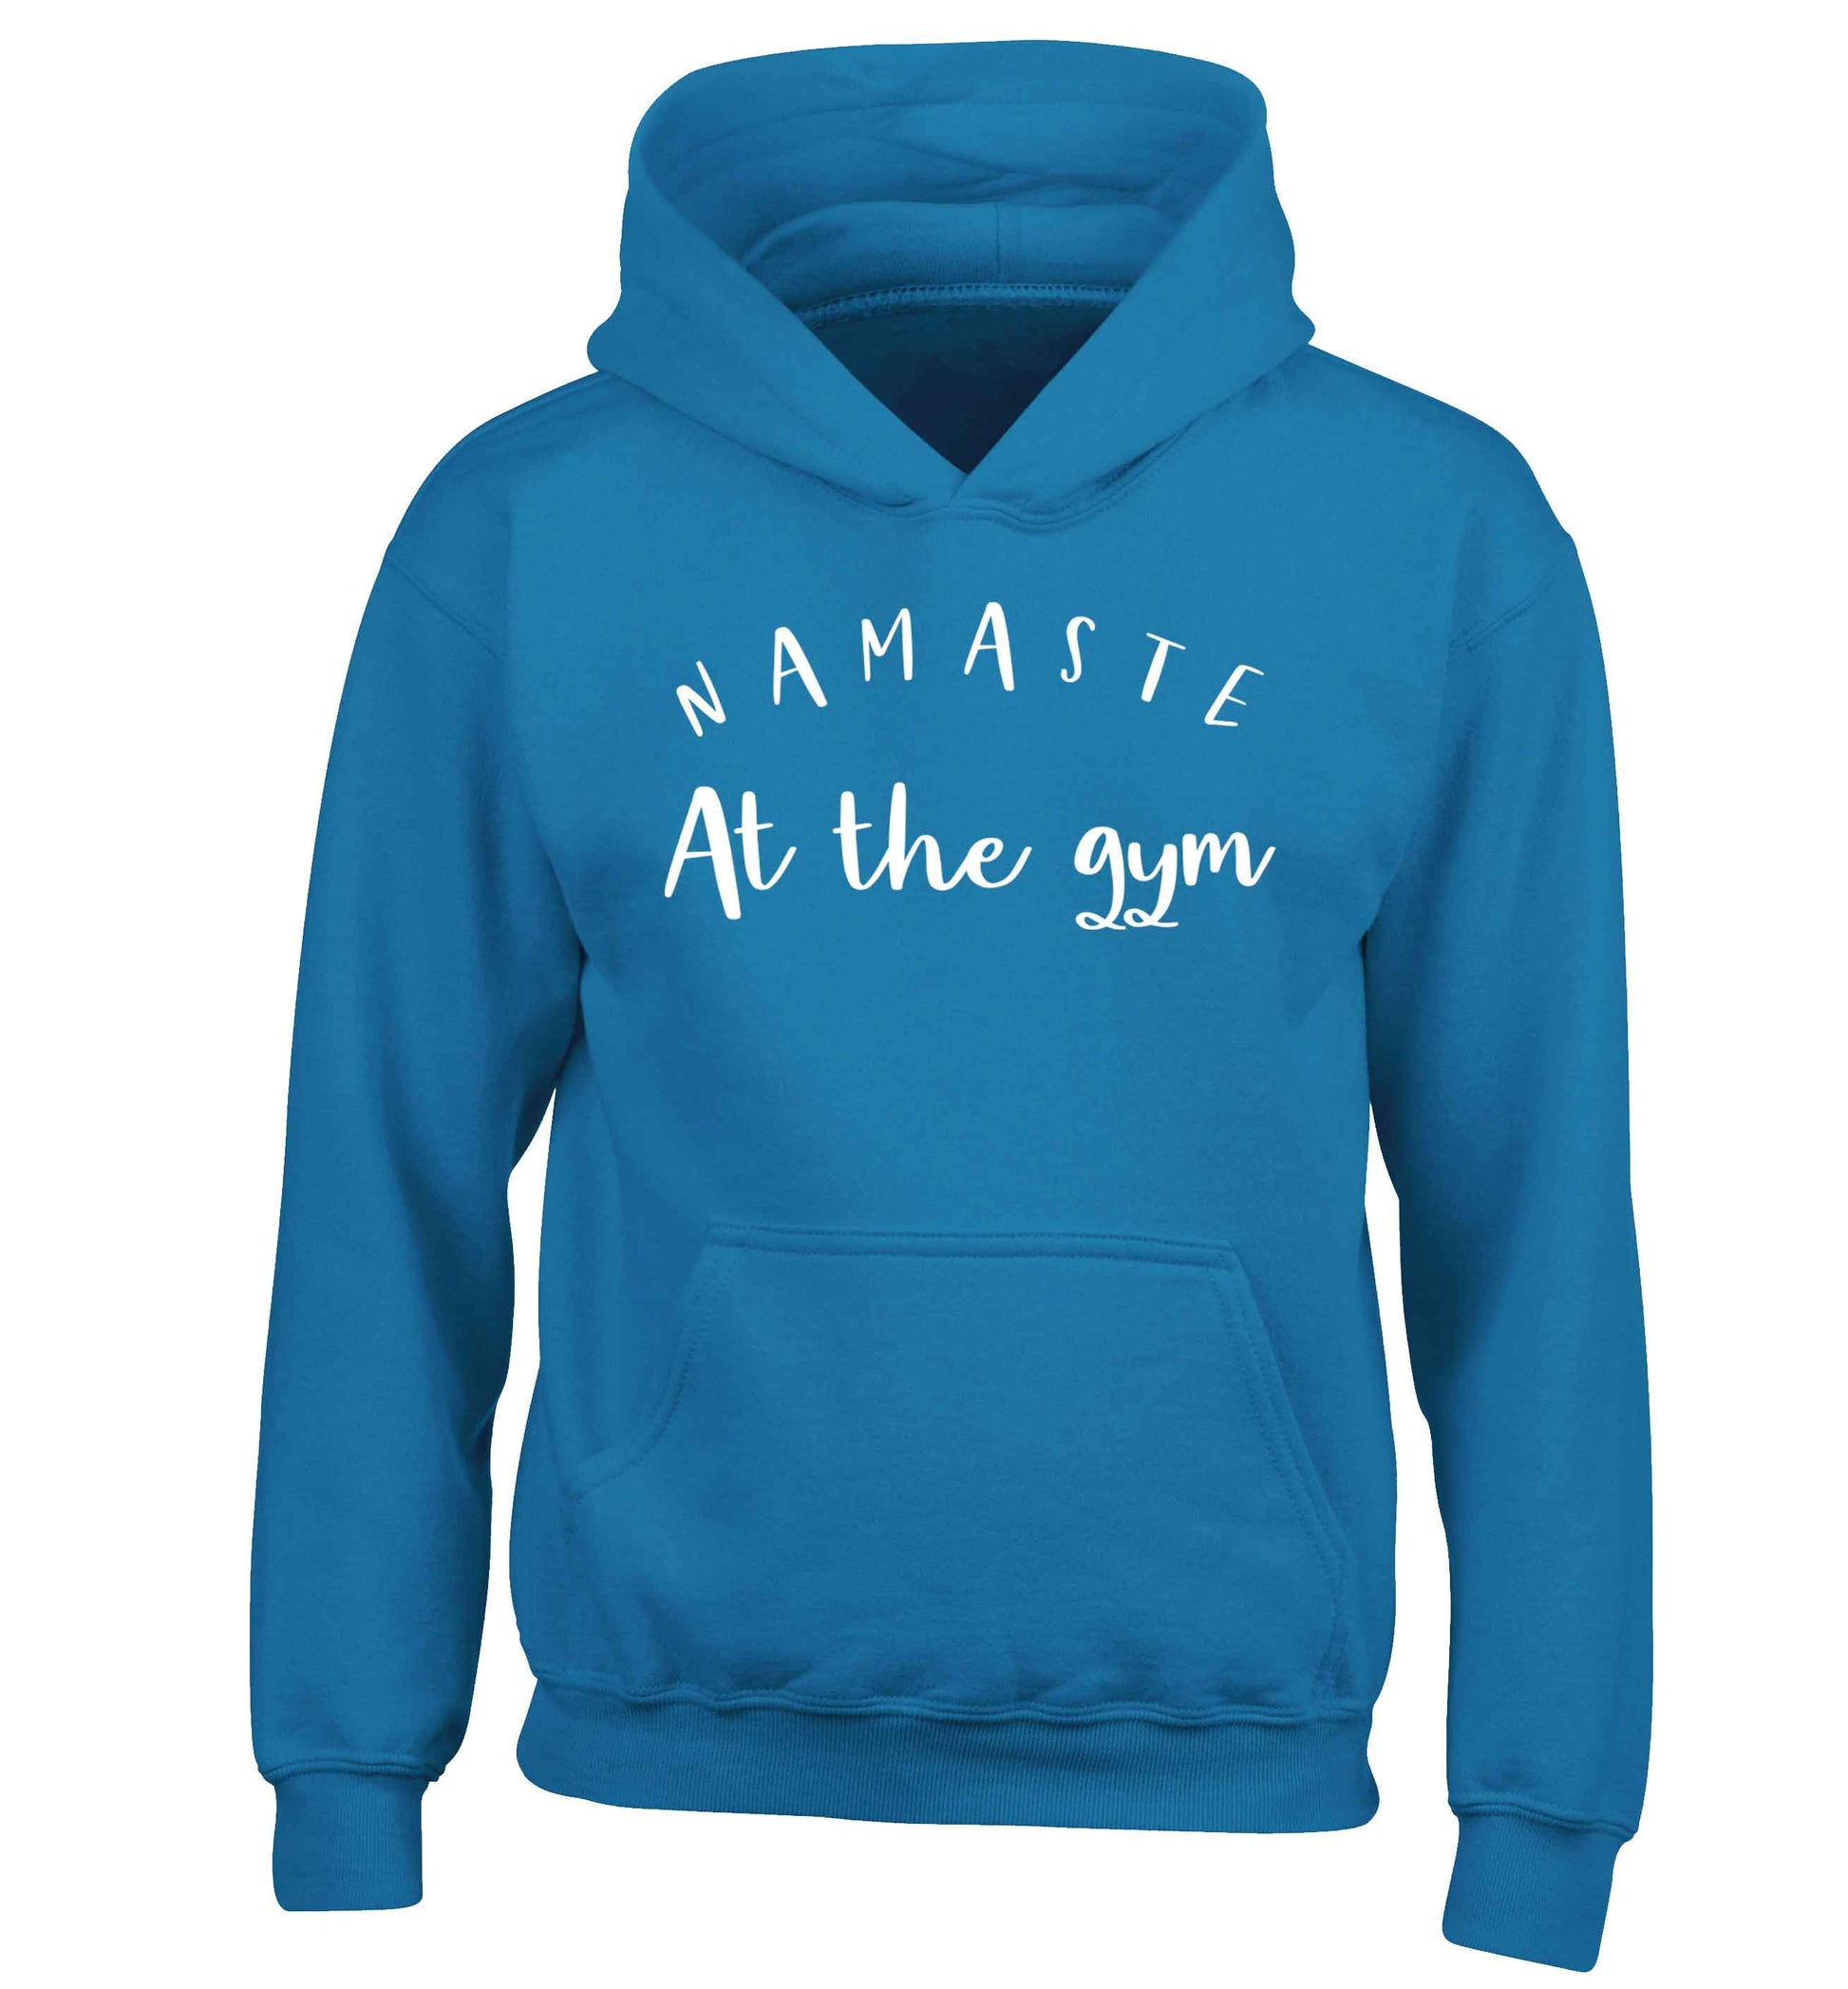 Namaste at the gym children's blue hoodie 12-13 Years